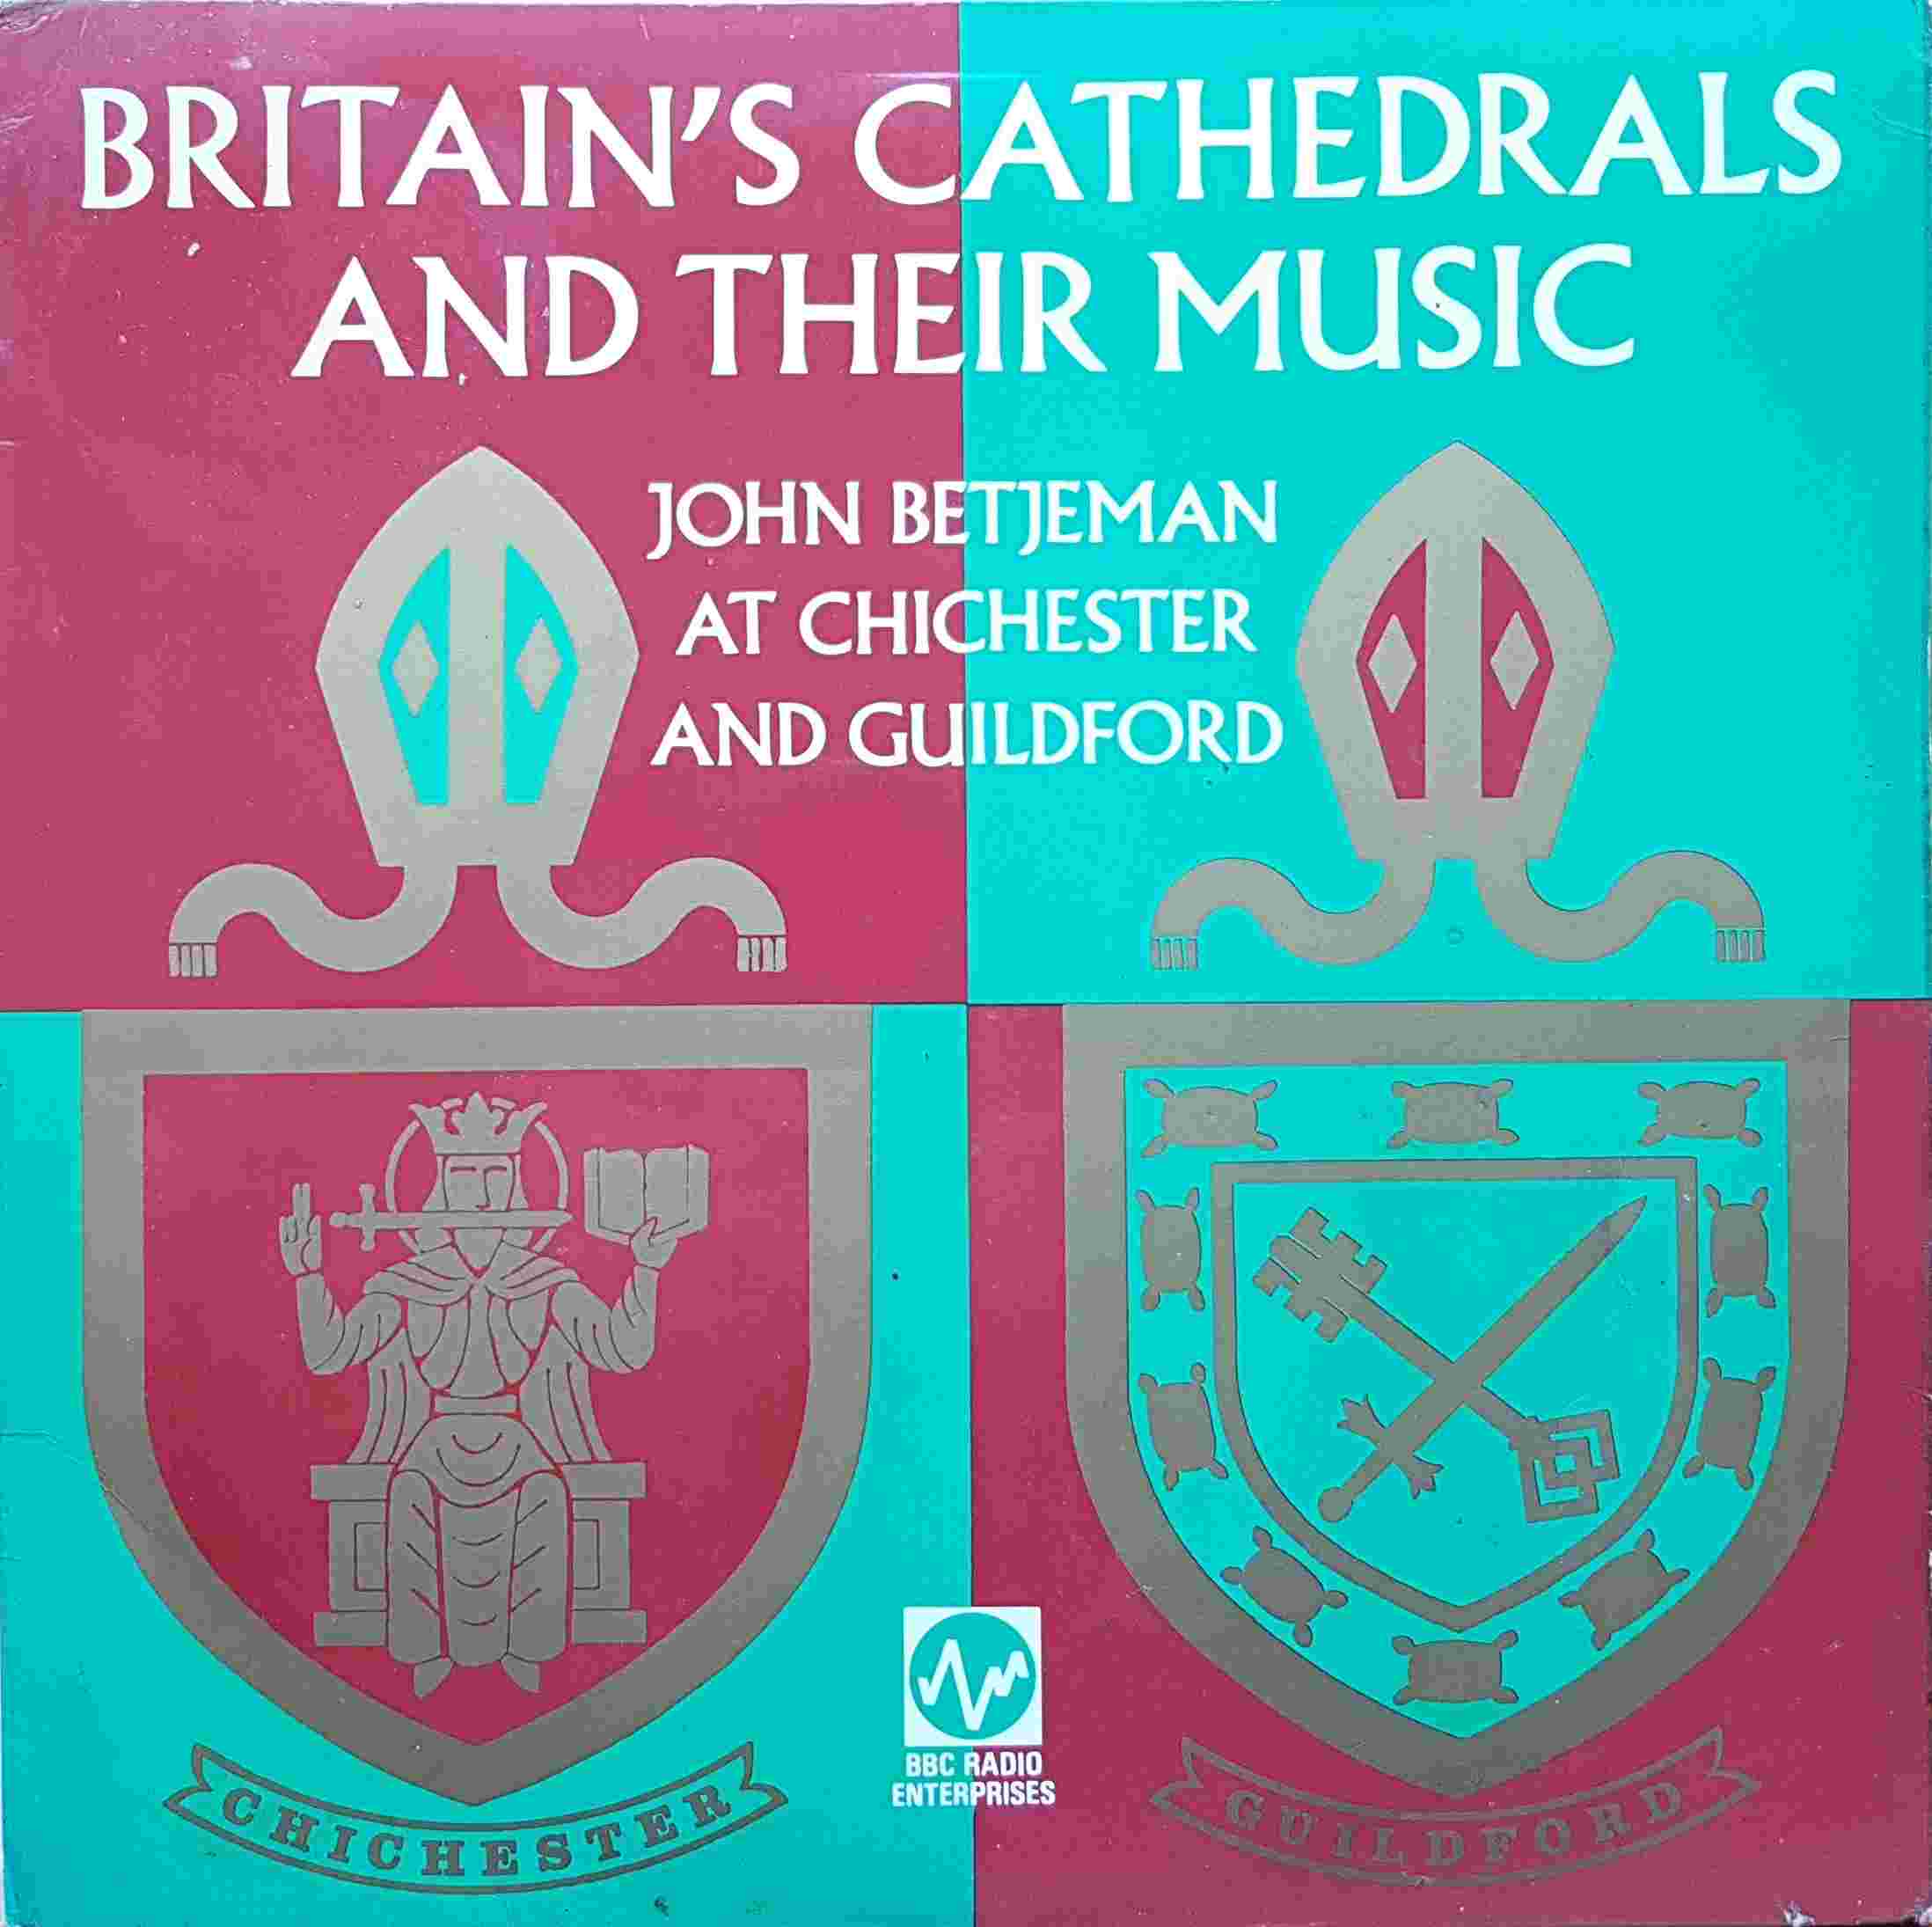 Picture of BBC 1005 Britain's cathedrals and their music by artist John Betjeman from the BBC albums - Records and Tapes library